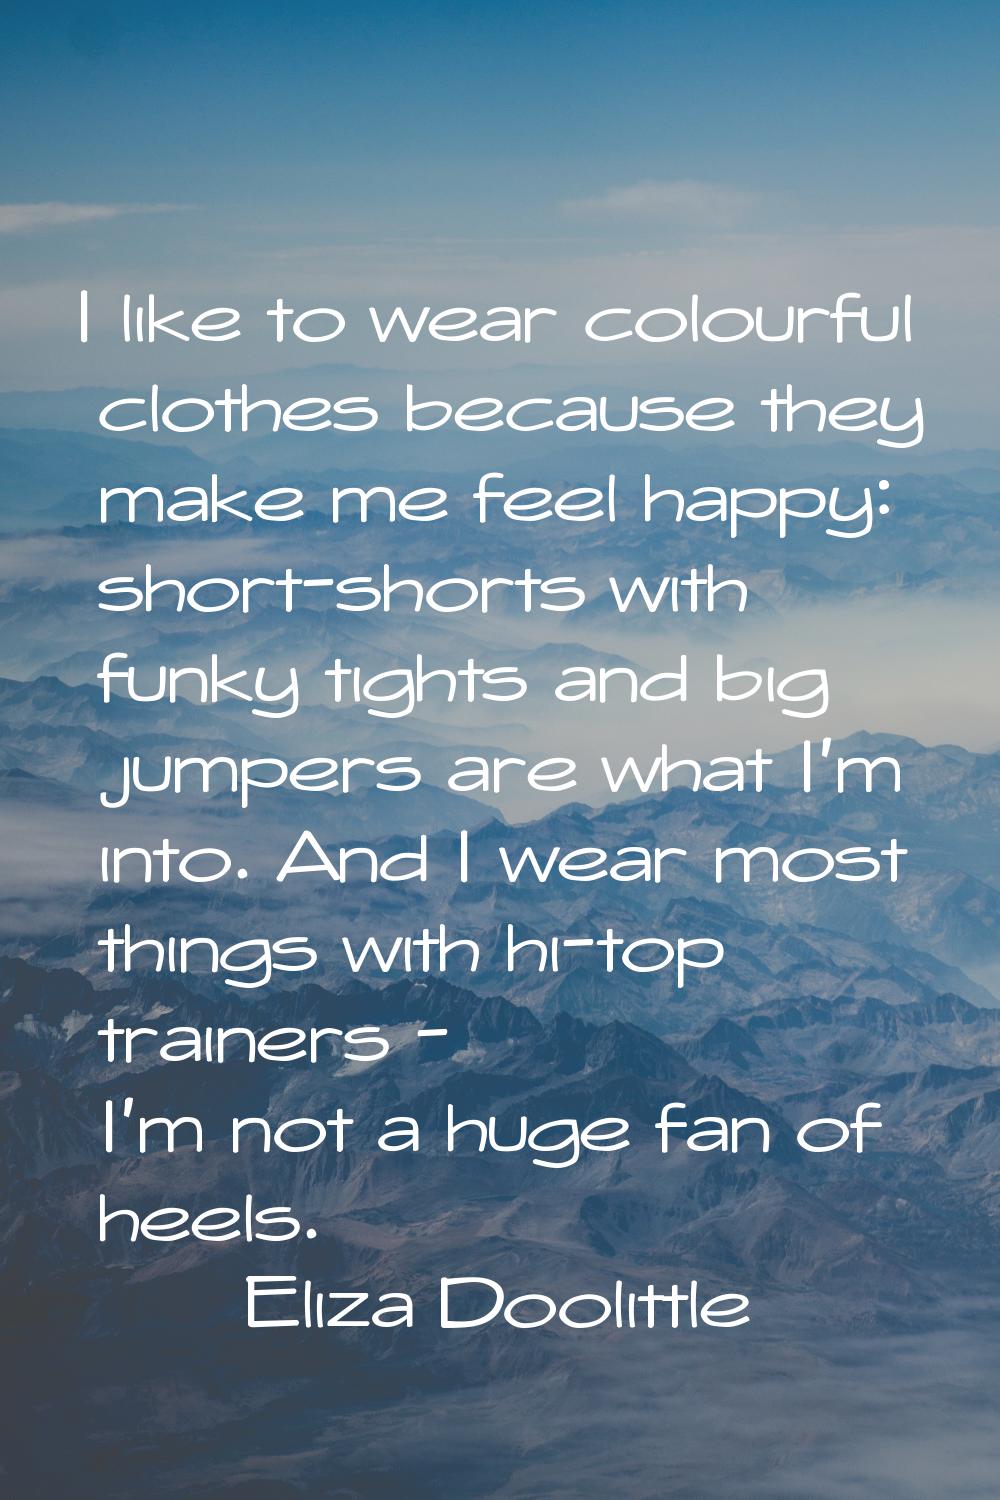 I like to wear colourful clothes because they make me feel happy: short-shorts with funky tights an